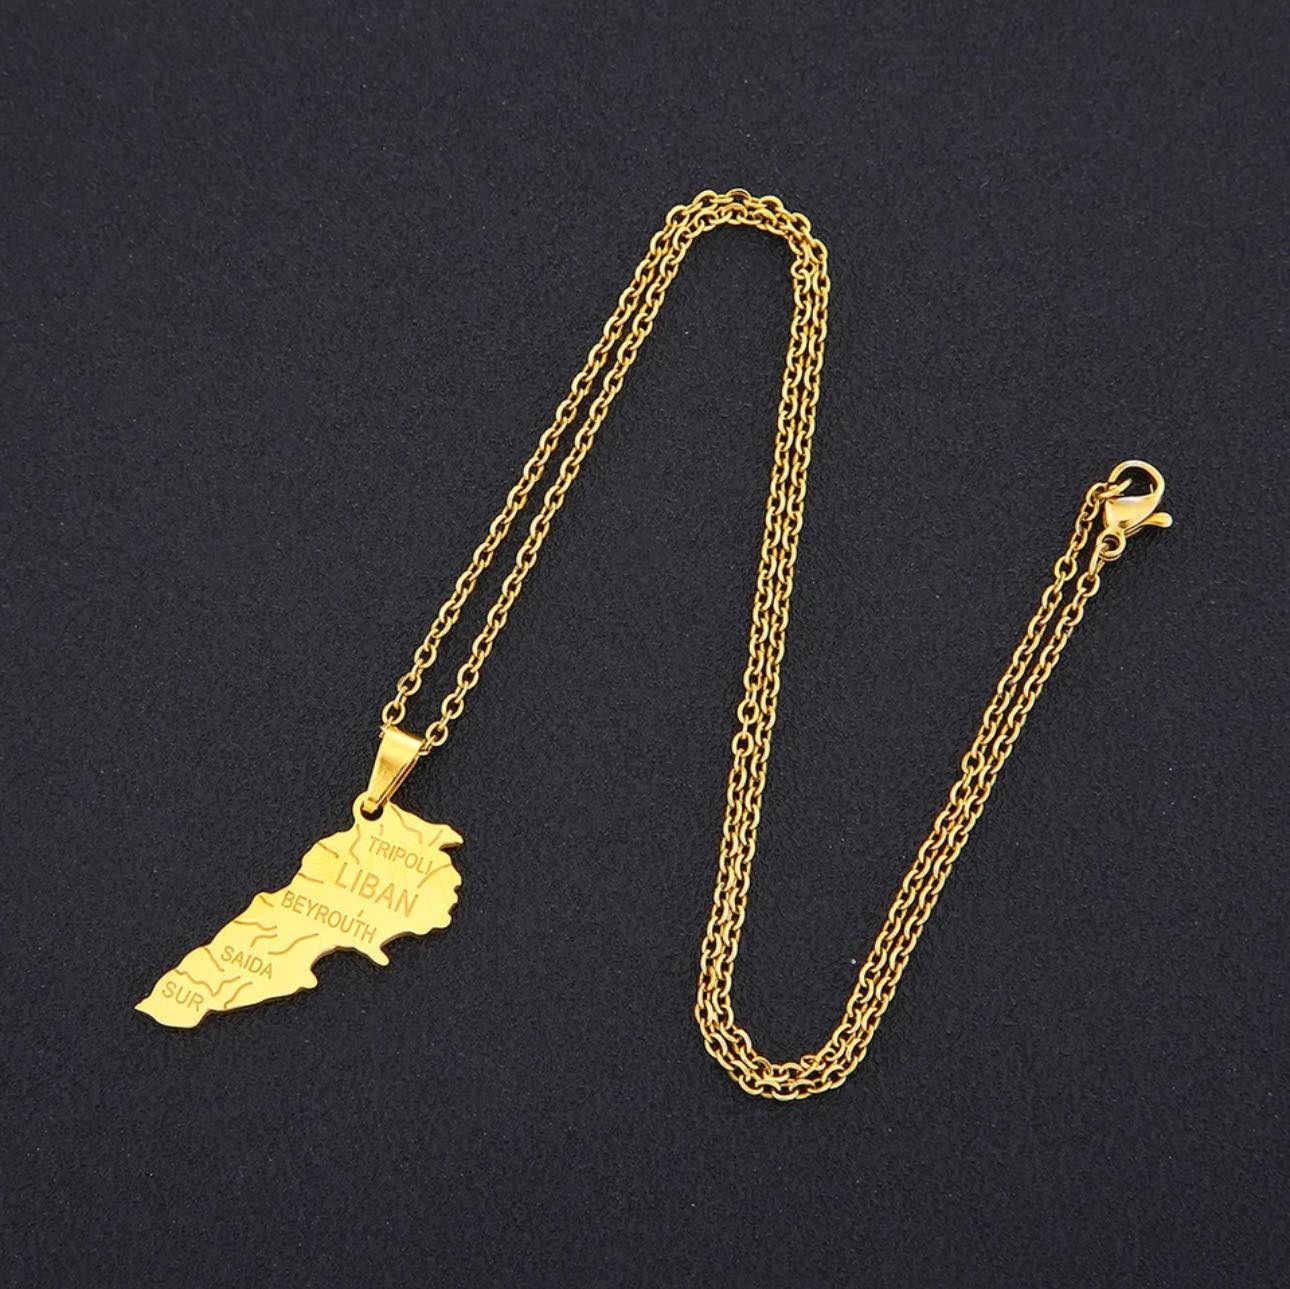 Lebanon Map & Cities Necklace